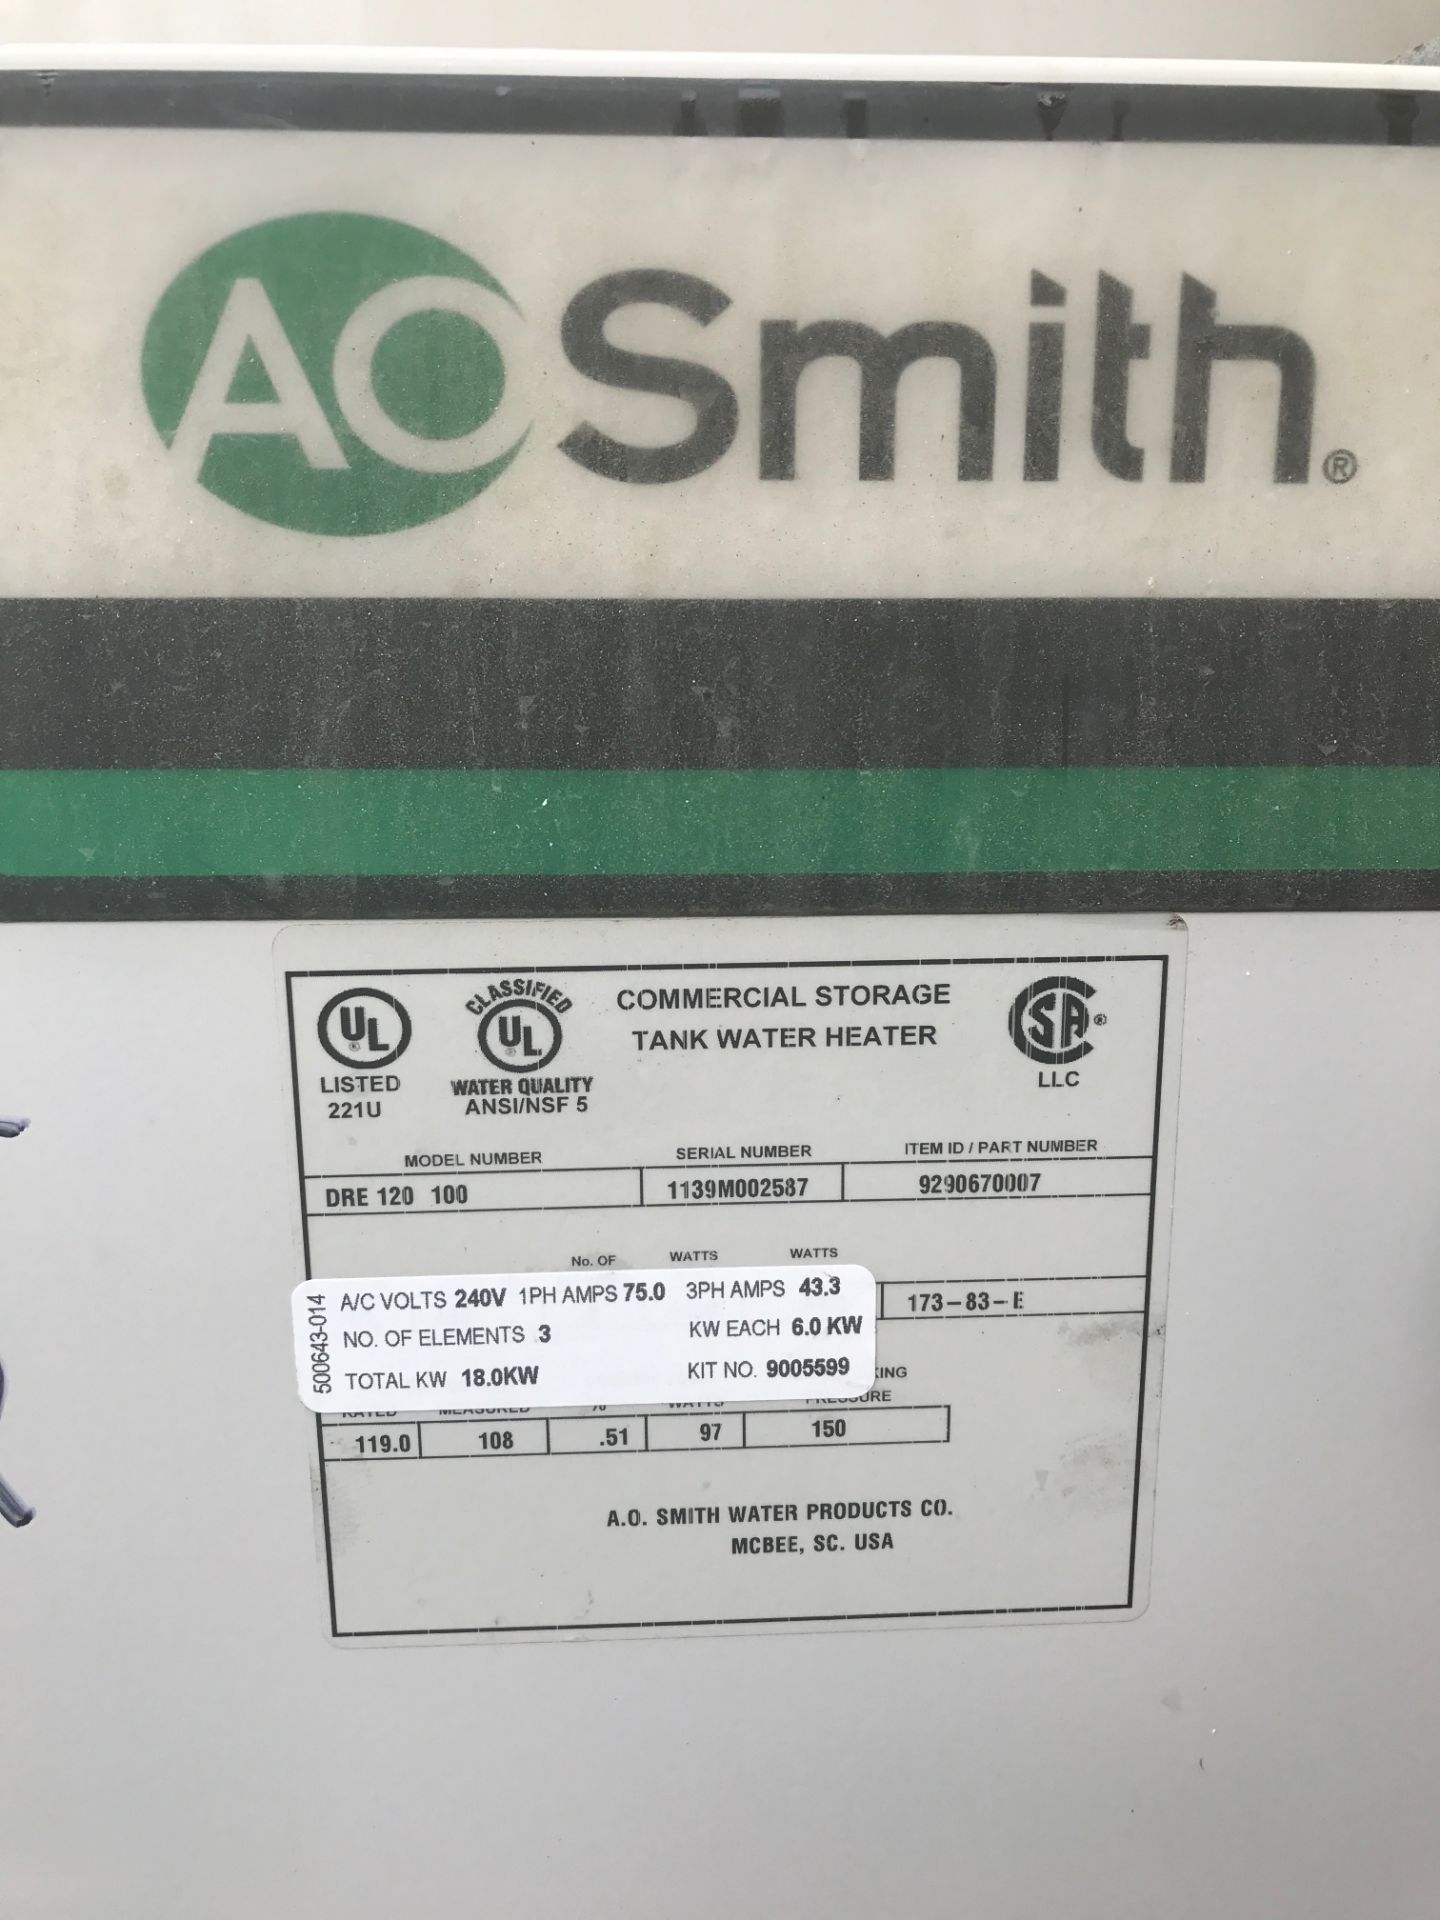 AO Smith Water Heater - Image 2 of 2